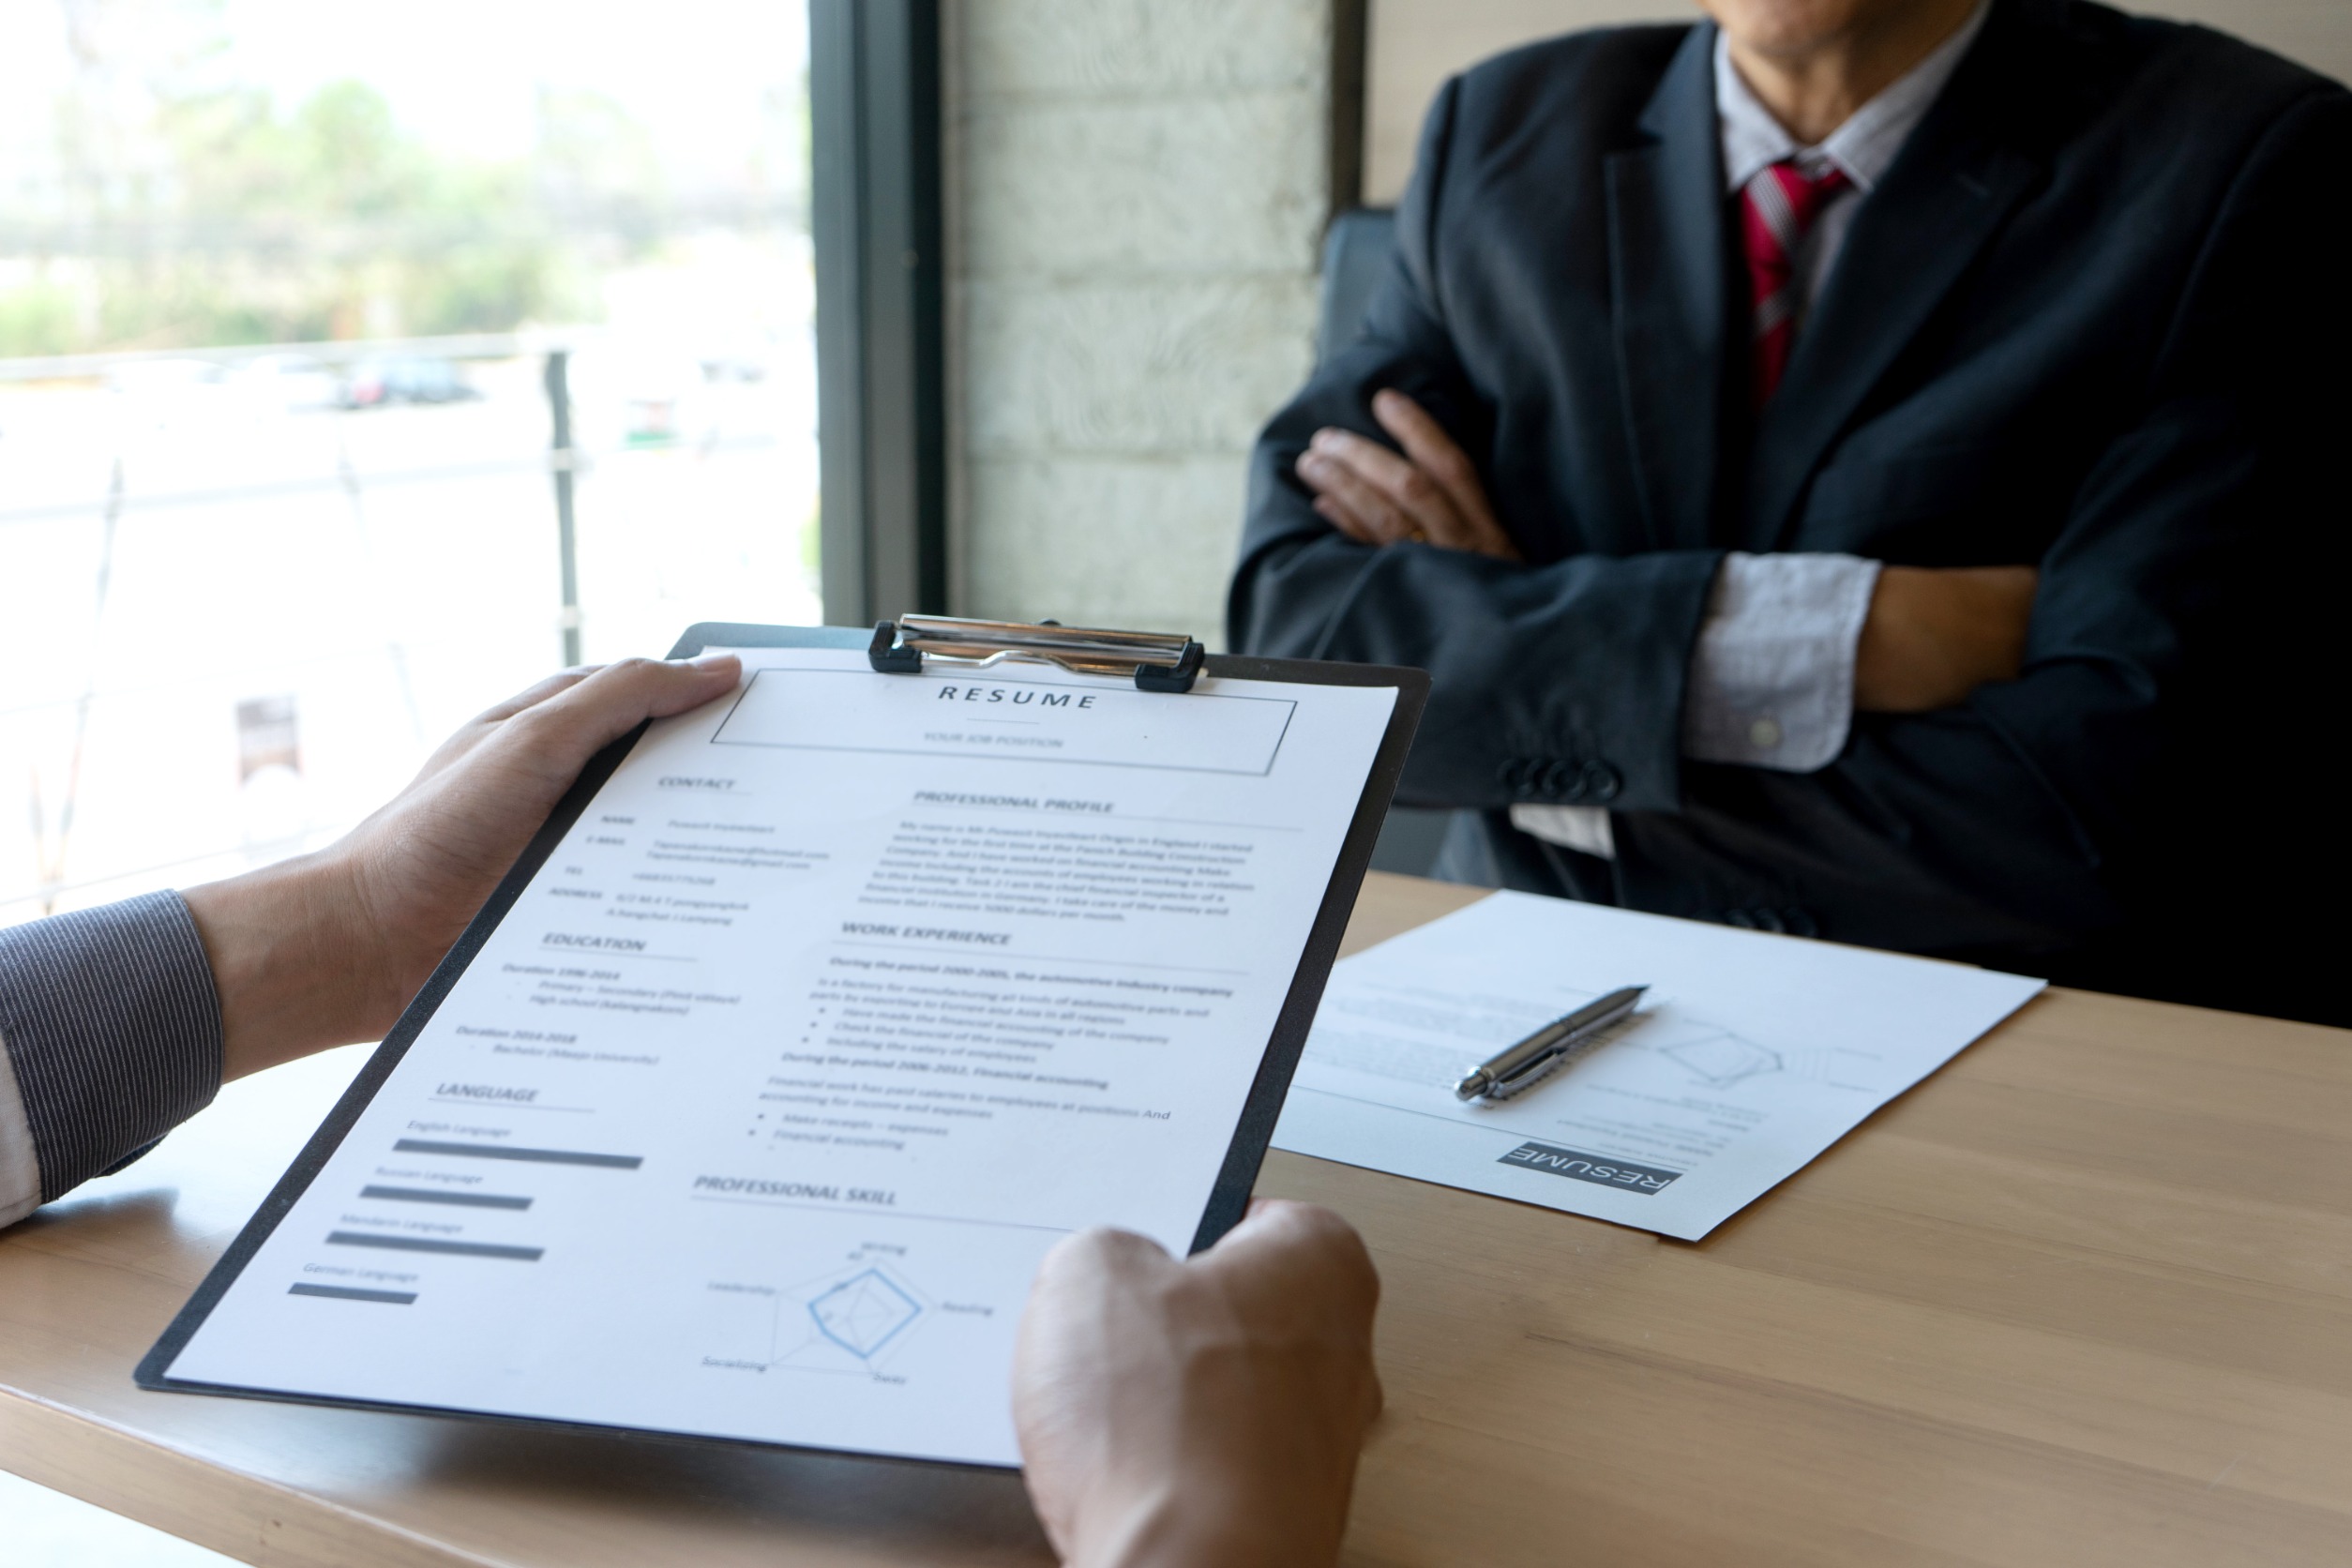 <p>In many cases, if a resume appears too good to be true, it is. HR professionals are experienced in assessing candidate qualifications and can usually discern when a resume has been exaggerated or falsified to meet the job requirements.</p>